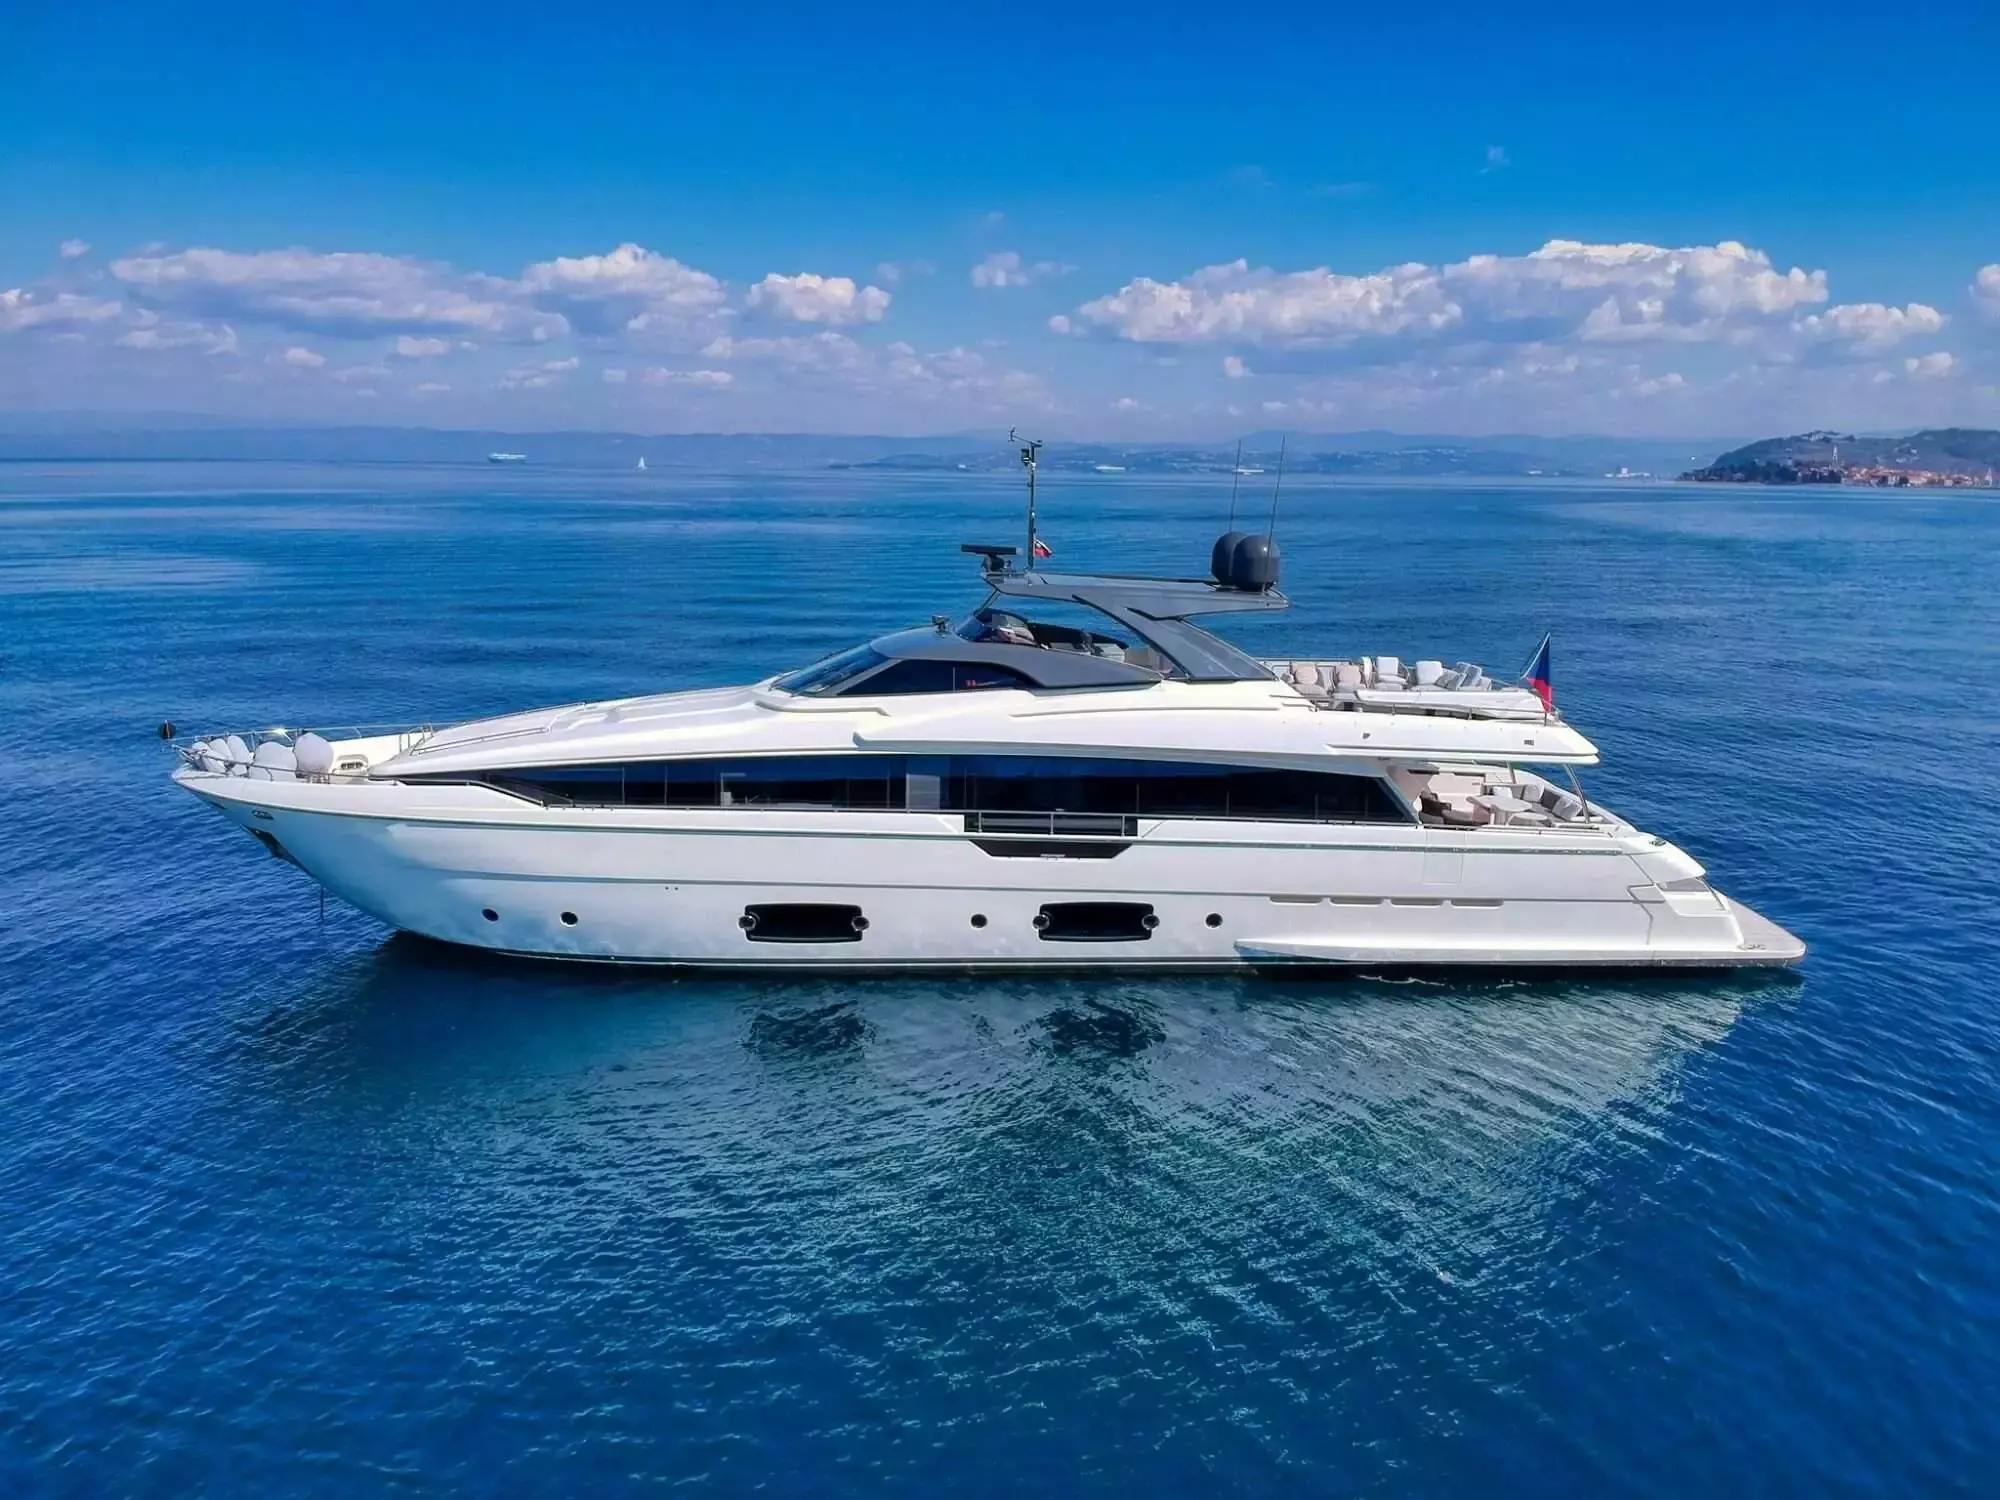 Damari by Ferretti - Top rates for a Rental of a private Superyacht in Italy